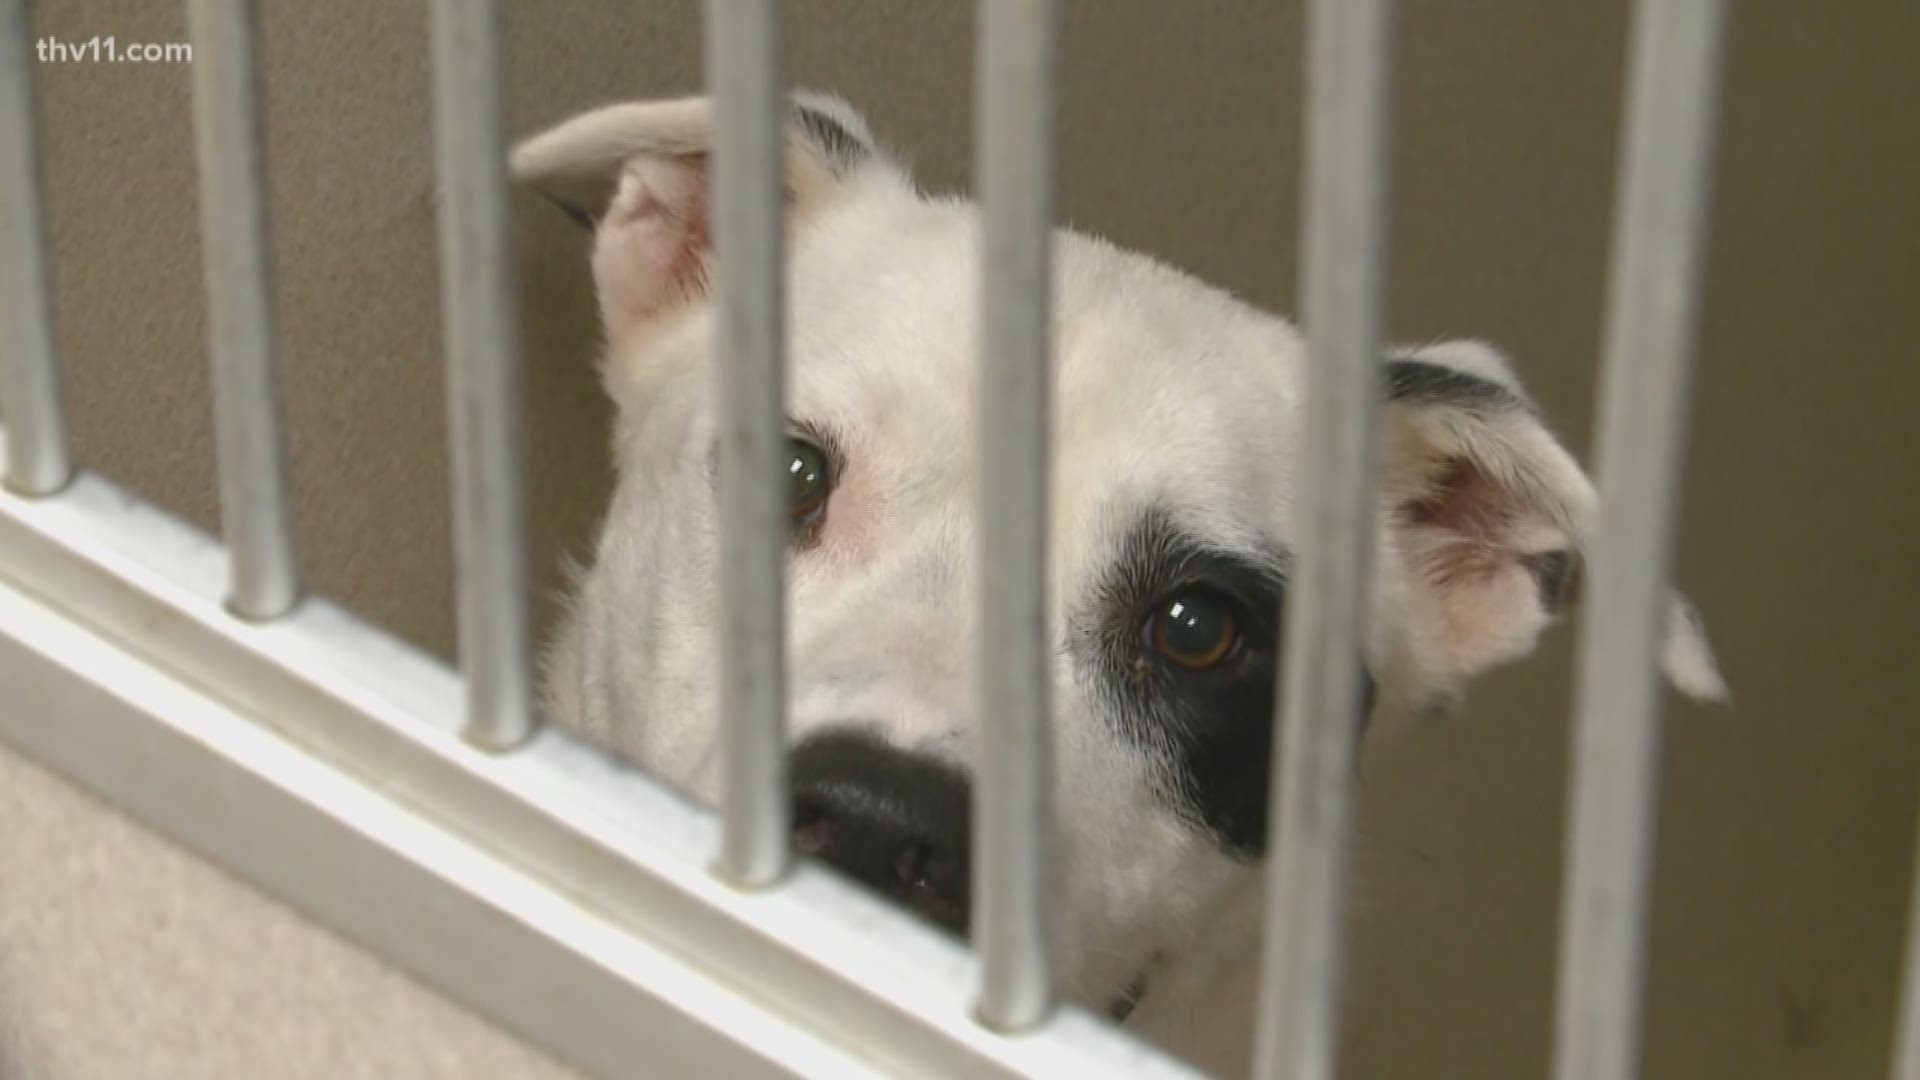 The coronavirus pandemic has forced businesses across the country to shut down temporarily and that includes animal shelters.